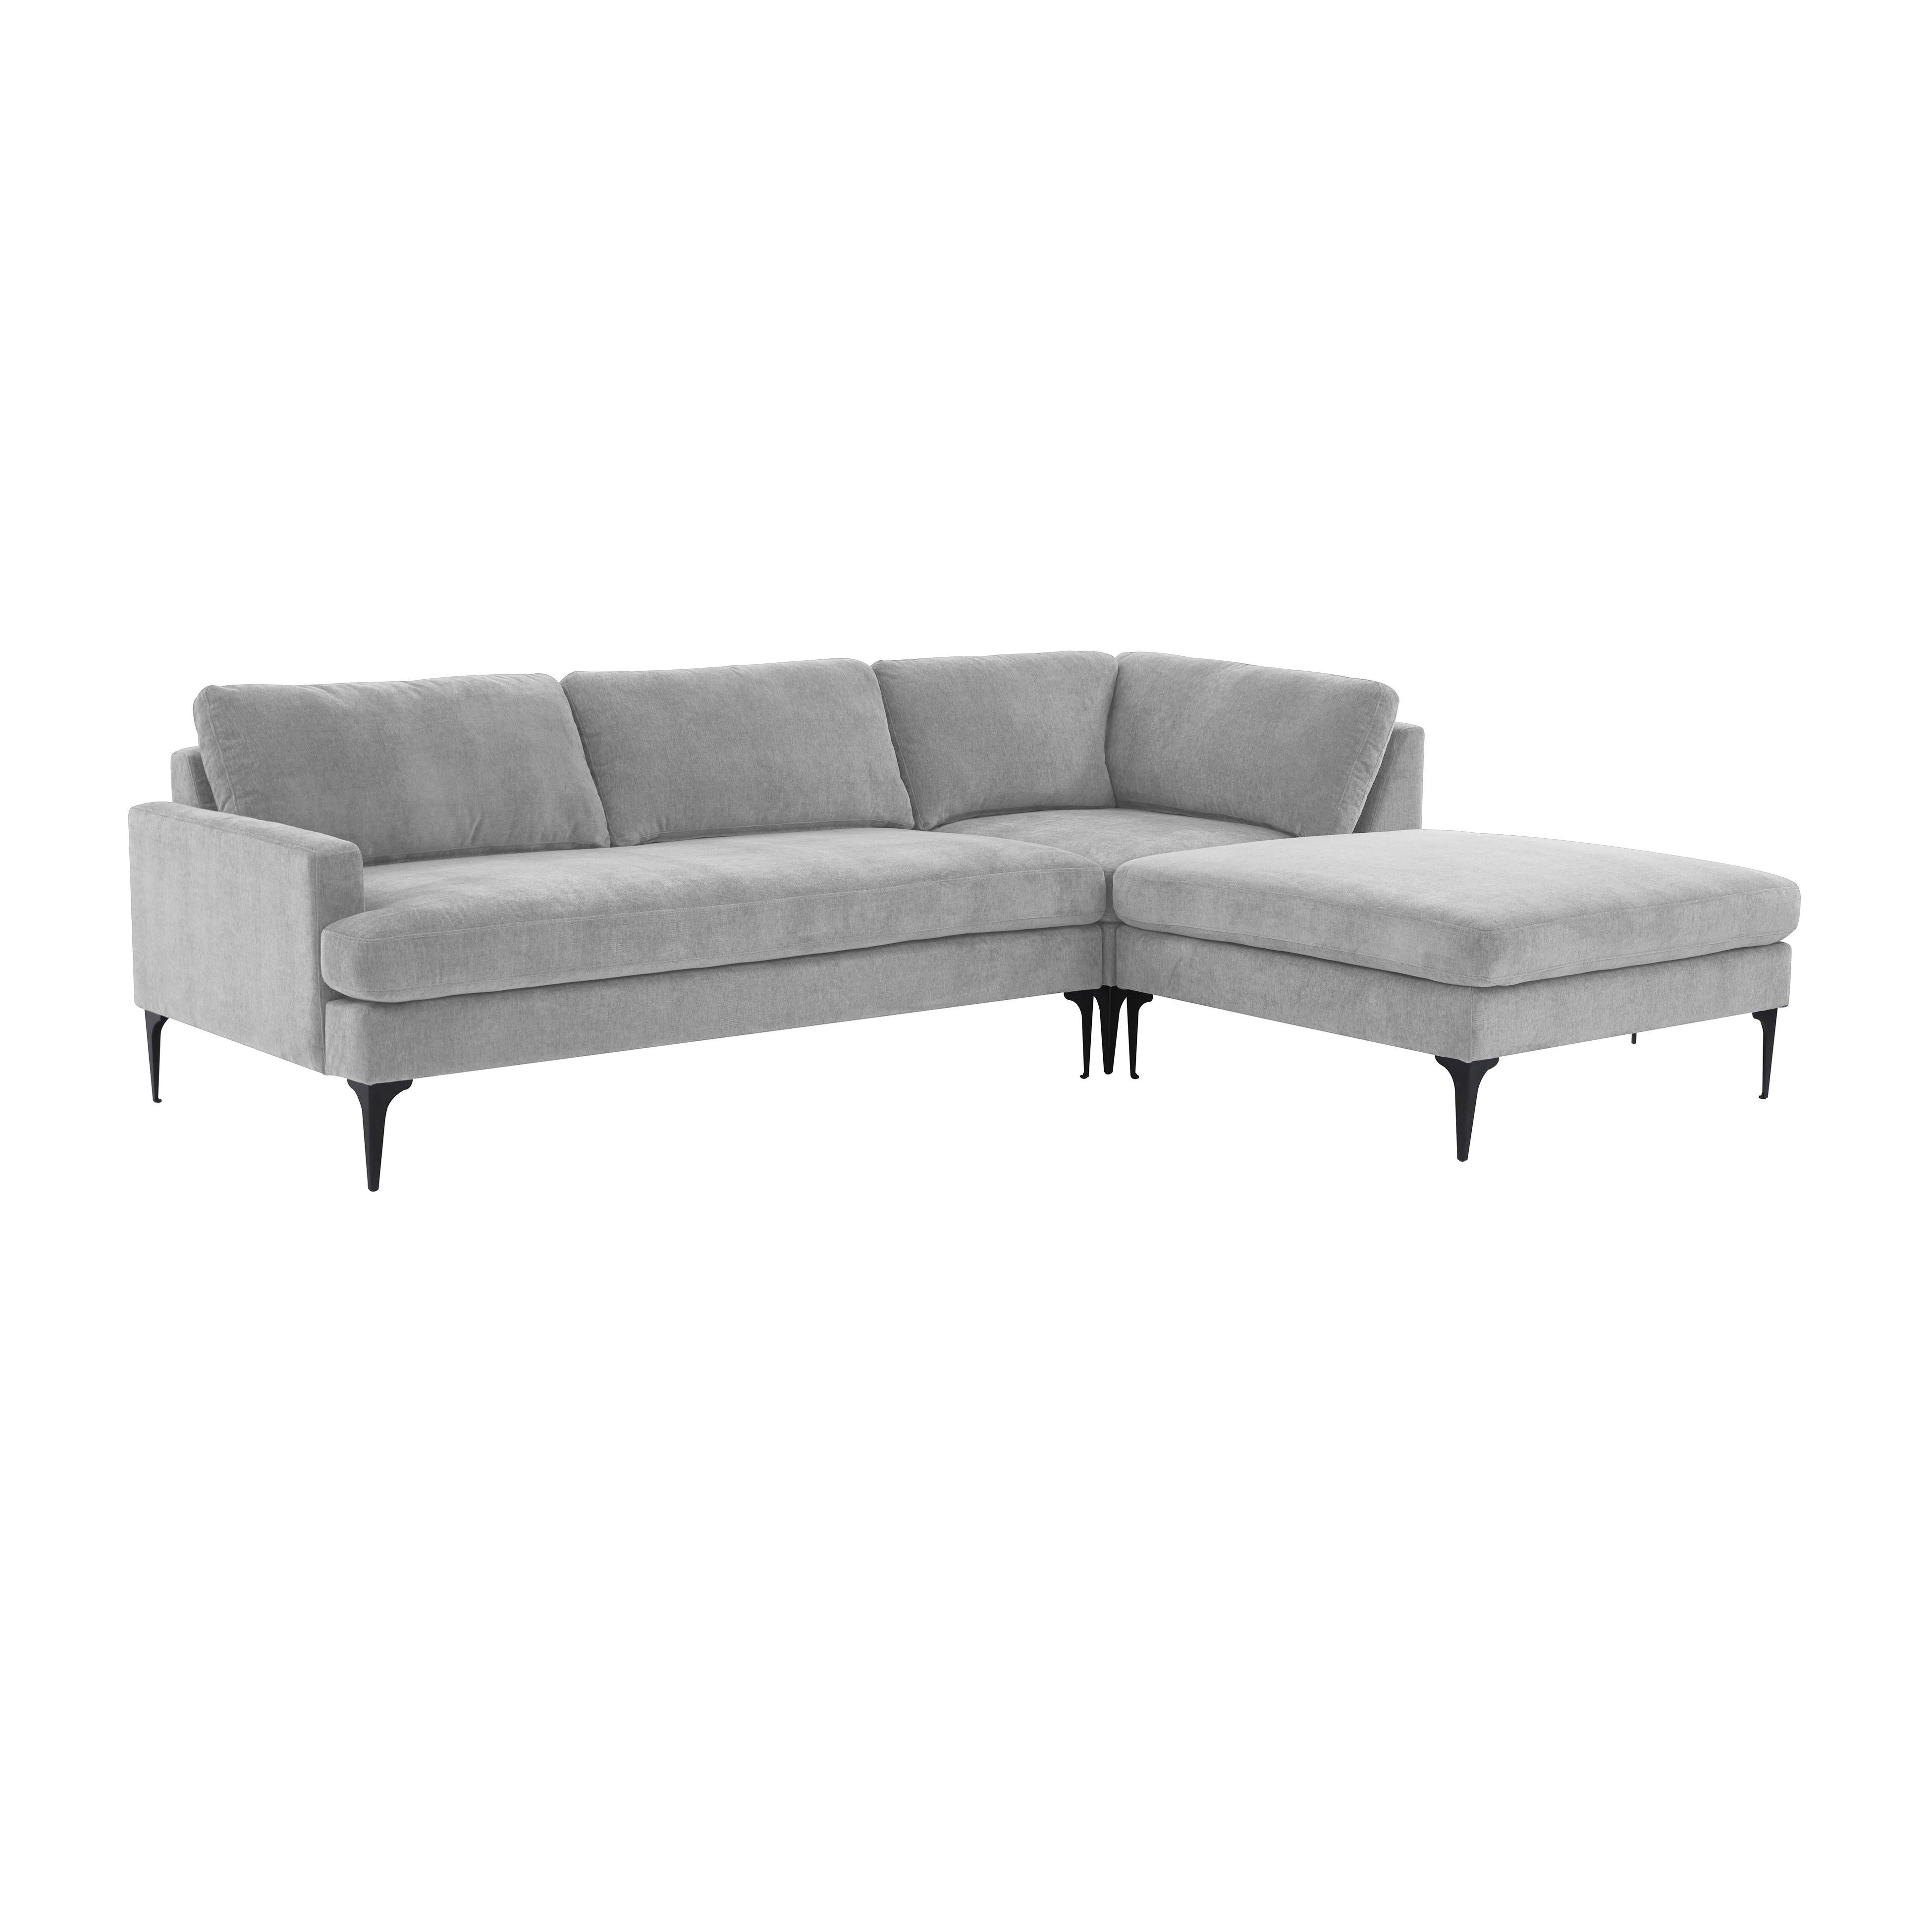 Tov Furniture Sectionals - Serena Gray Velvet RAF Chaise Sectional with Black Legs